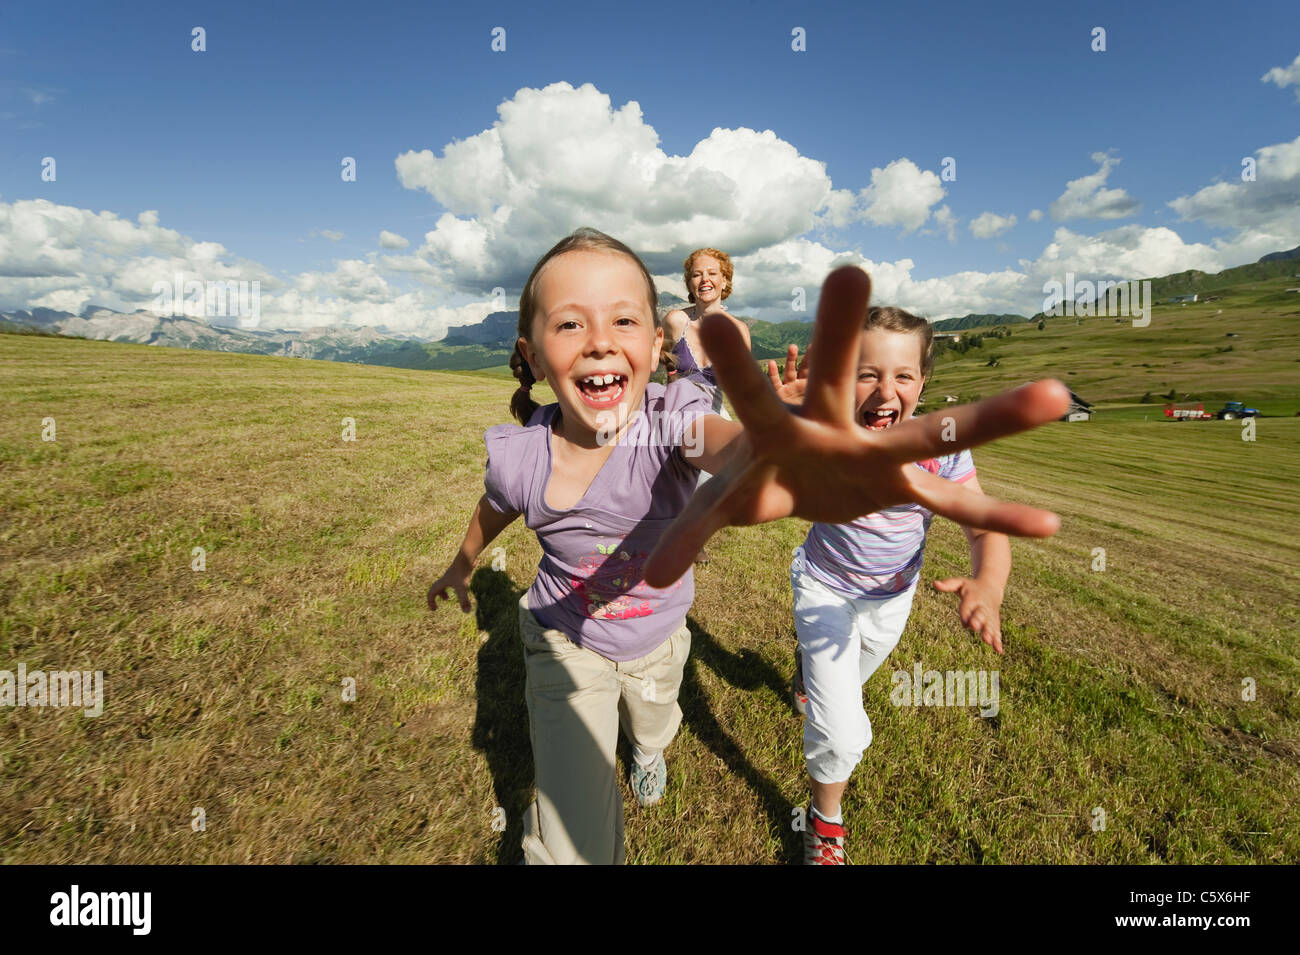 Italy, Seiseralm, Mother and daughters (6-7), (8-9) running in meadow, laughing, portrait Stock Photo